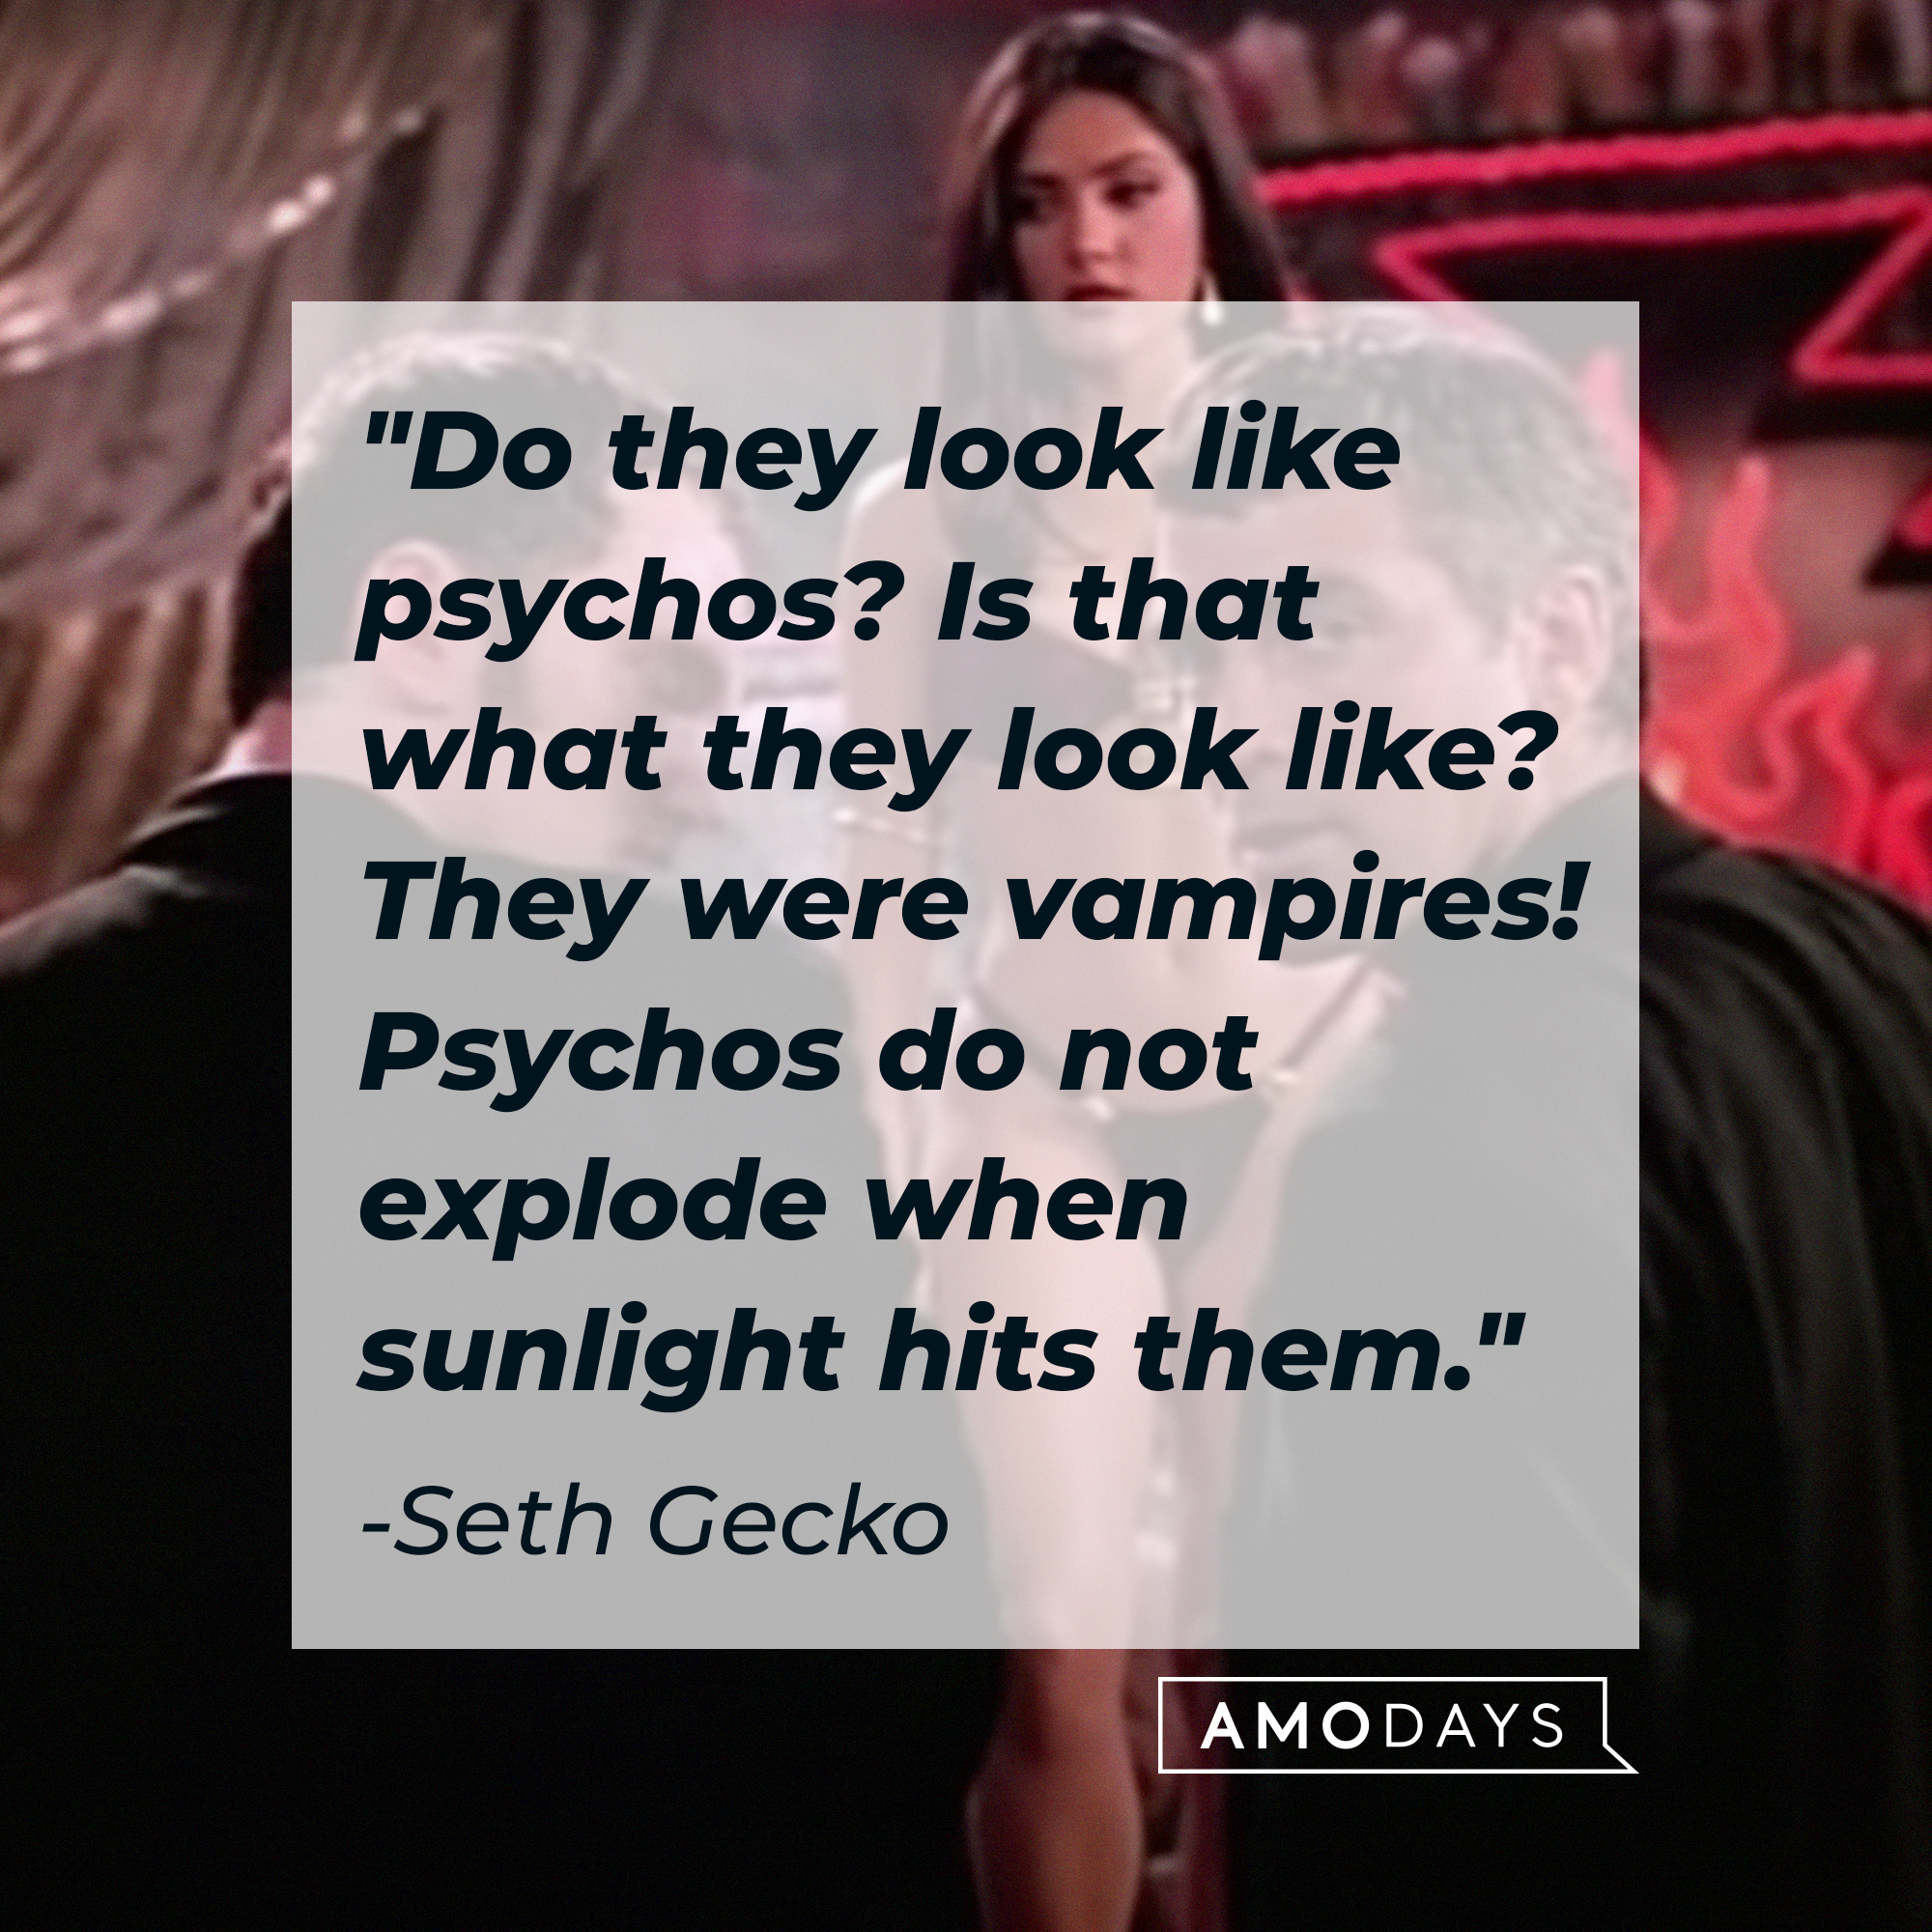 Seth Gecko's quote: "Do they look like psychos? Is that what they look like? They were vampires! Psychos do not explode when sunlight hits them." | Source: youtube.com/miramax